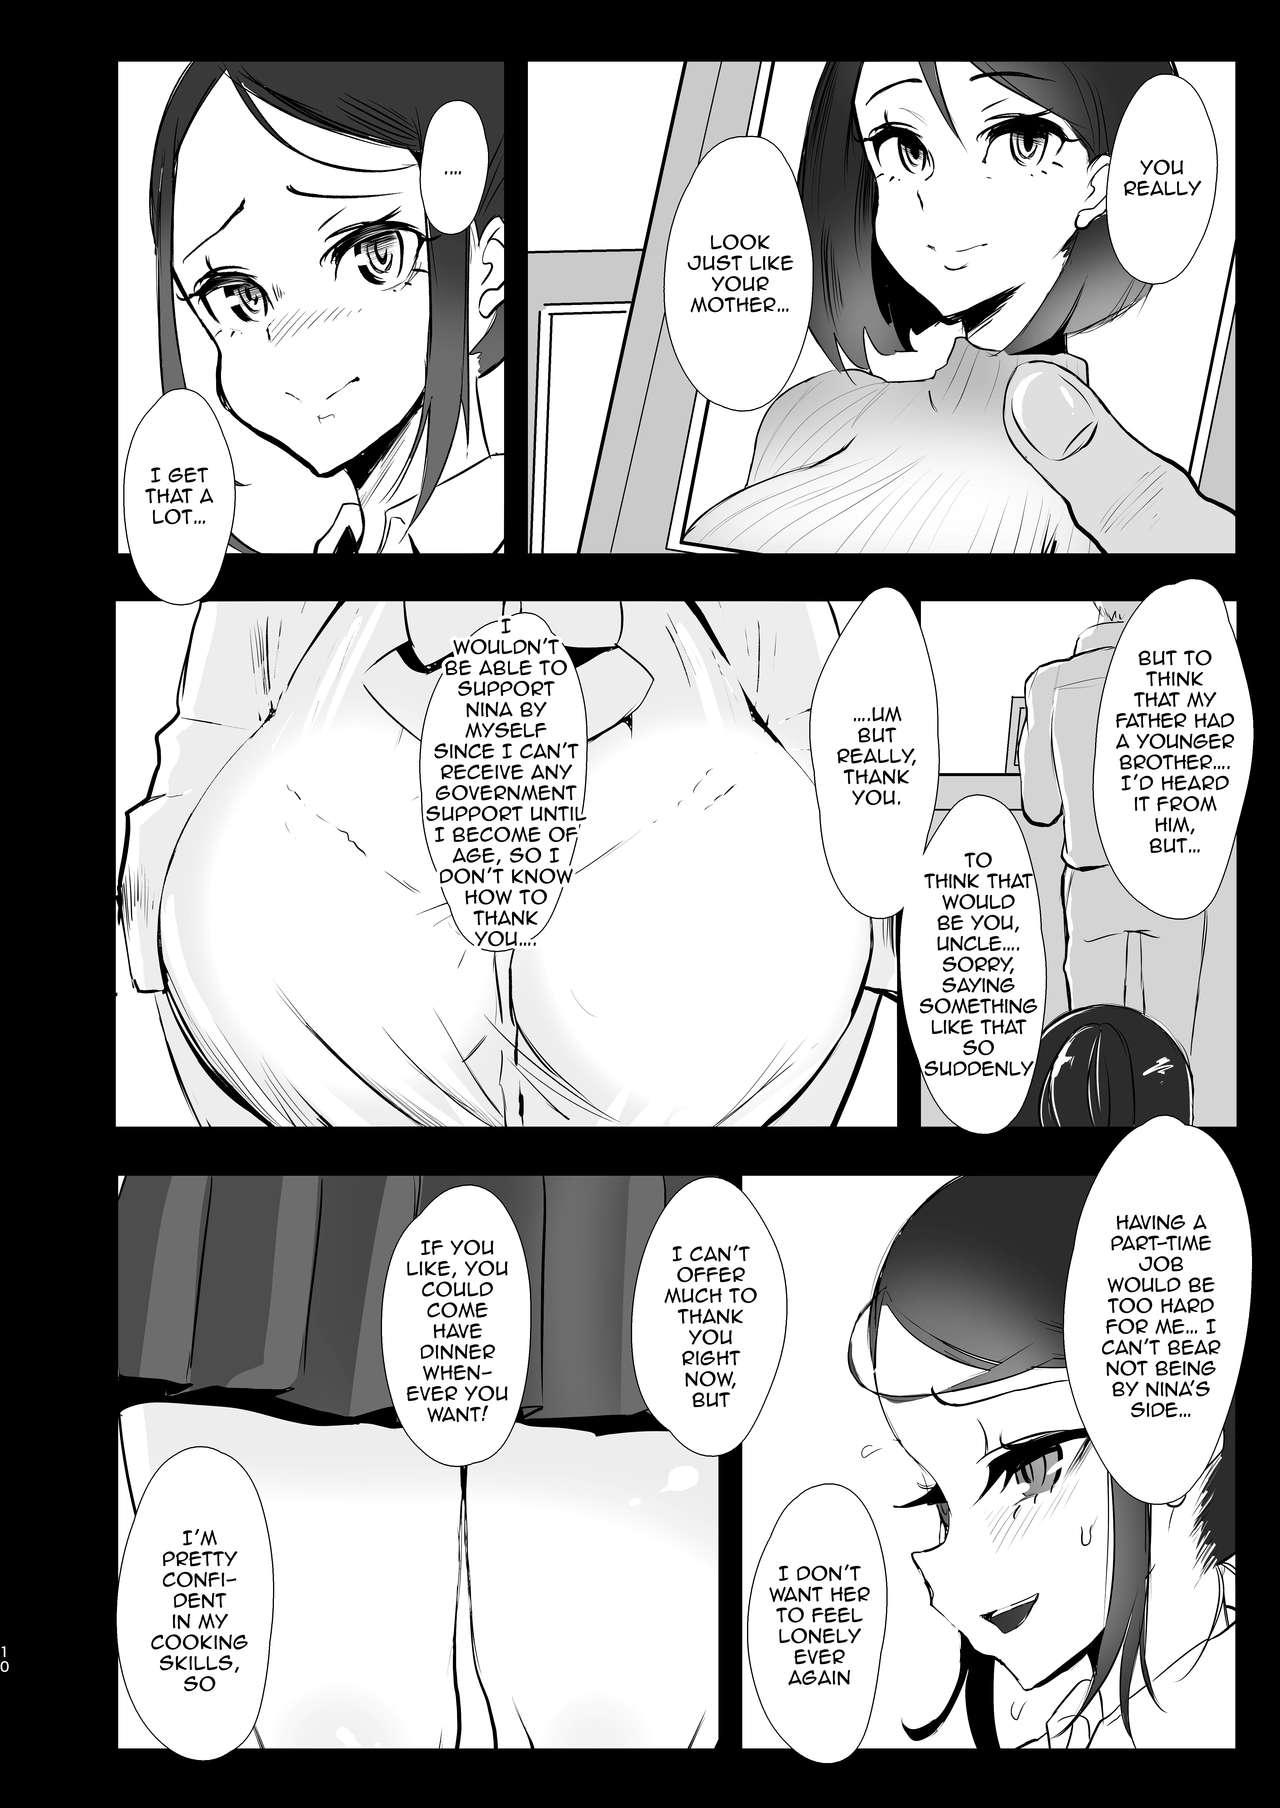 Kiss Himawari no Kage | The Other Side of the Sunflower - Original Messy - Page 9